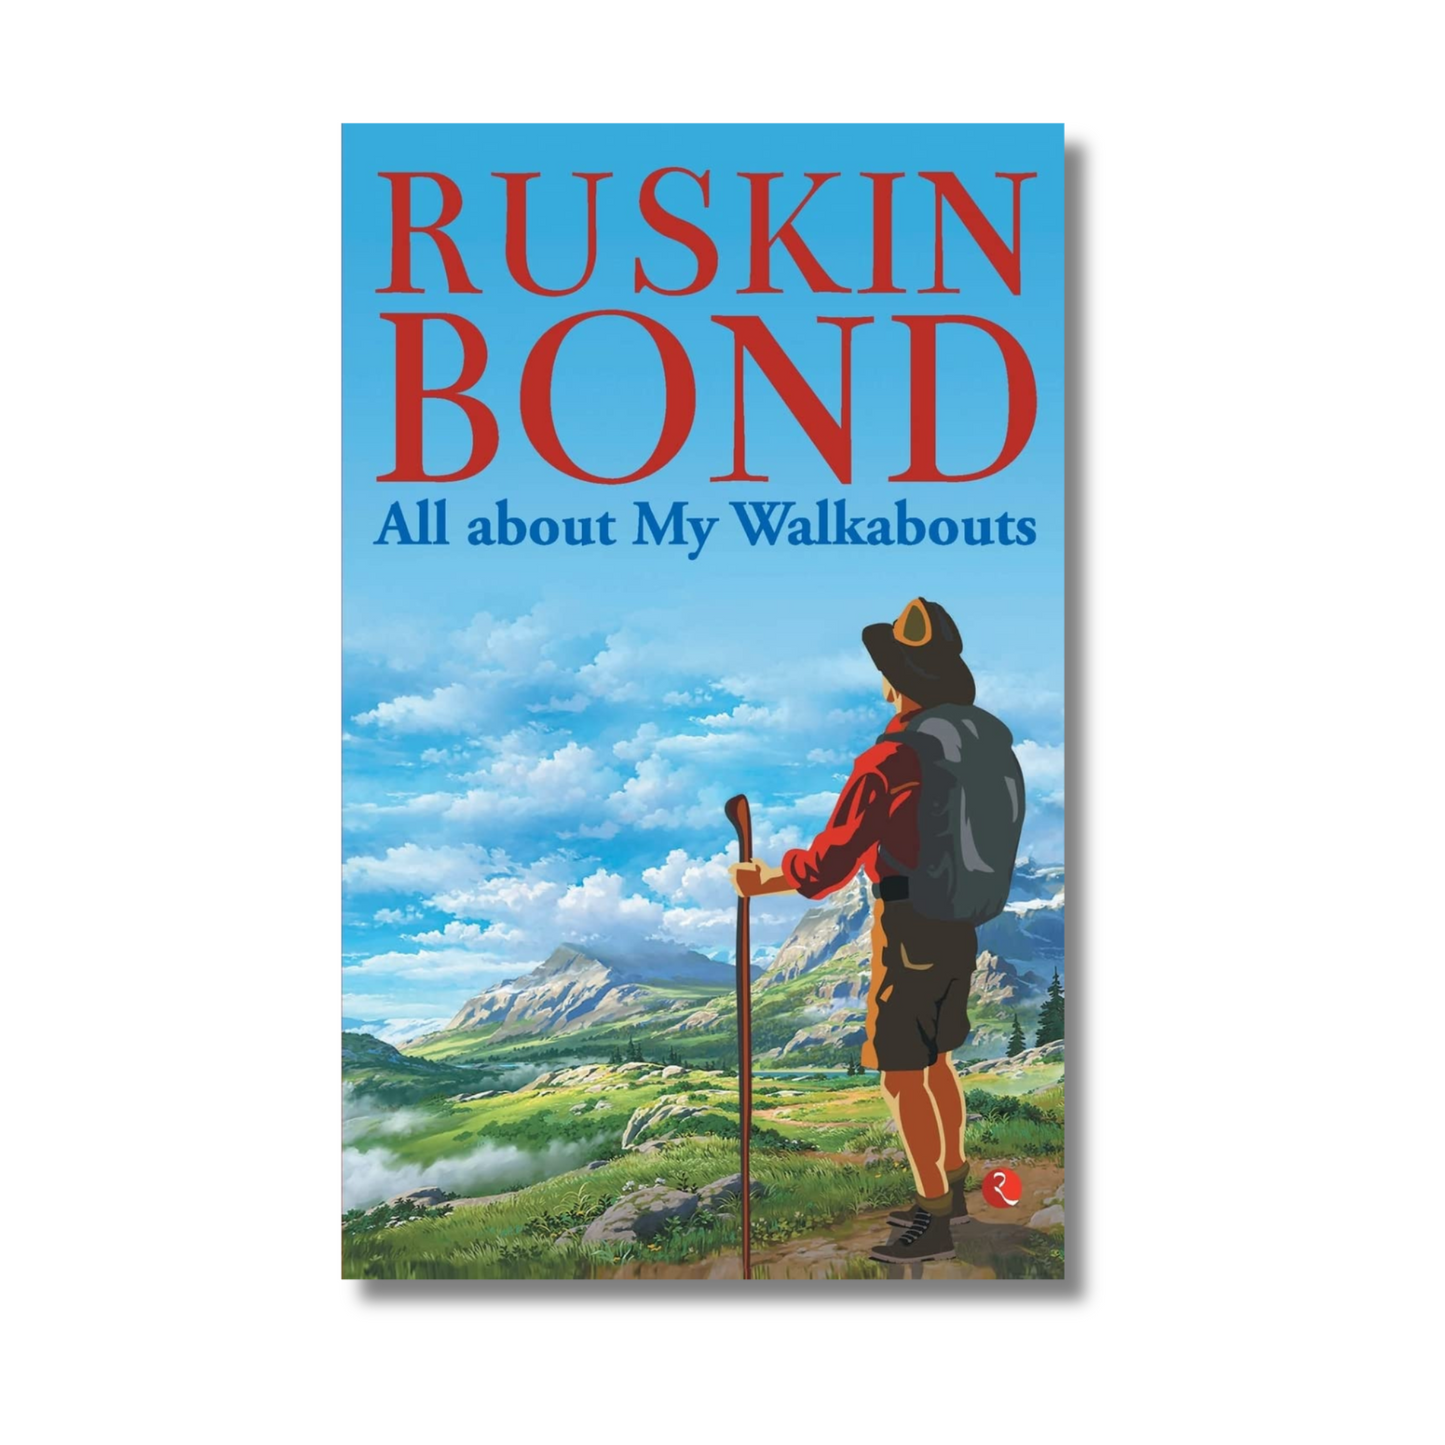 All About My Walkabouts By Ruskin Bond (Paperback)